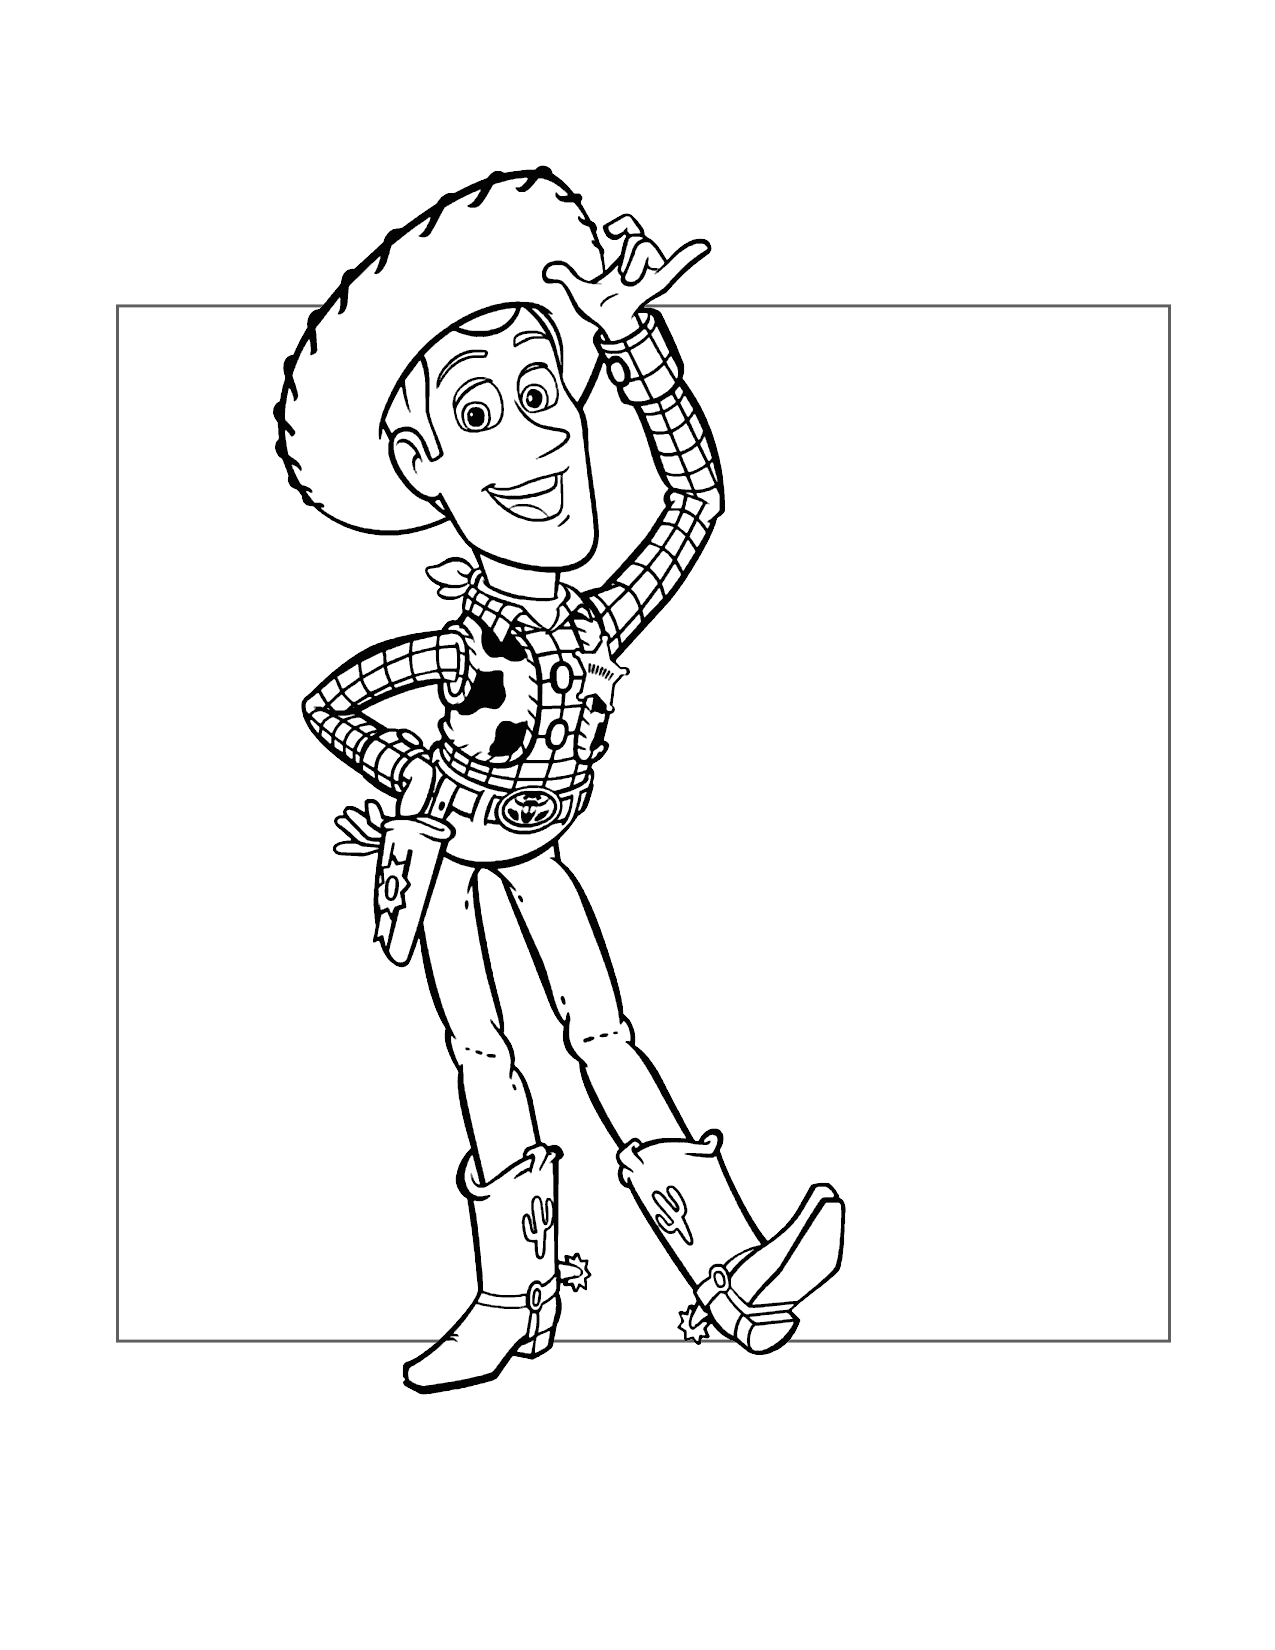 Woody Tips His Hat Coloring Page